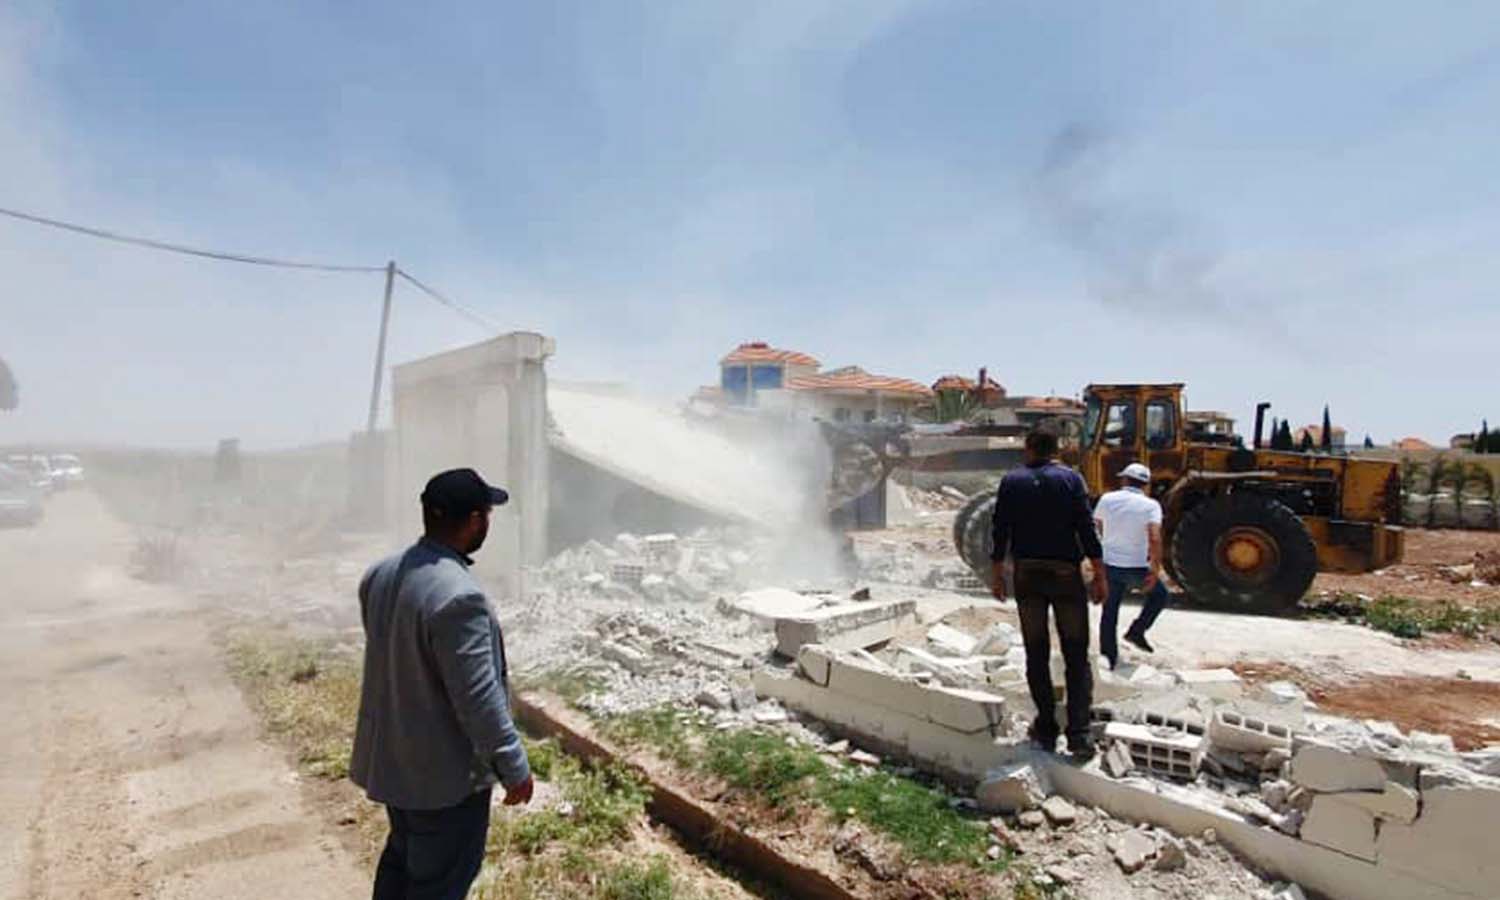 State workers of Rif Dimashq governorate (Damascus suburbs) remove unlicensed buildings on agricultural lands (outside the urban plan) in Drusha village - May 13, 2023 (Facebook/Rif Dimashq governorate)